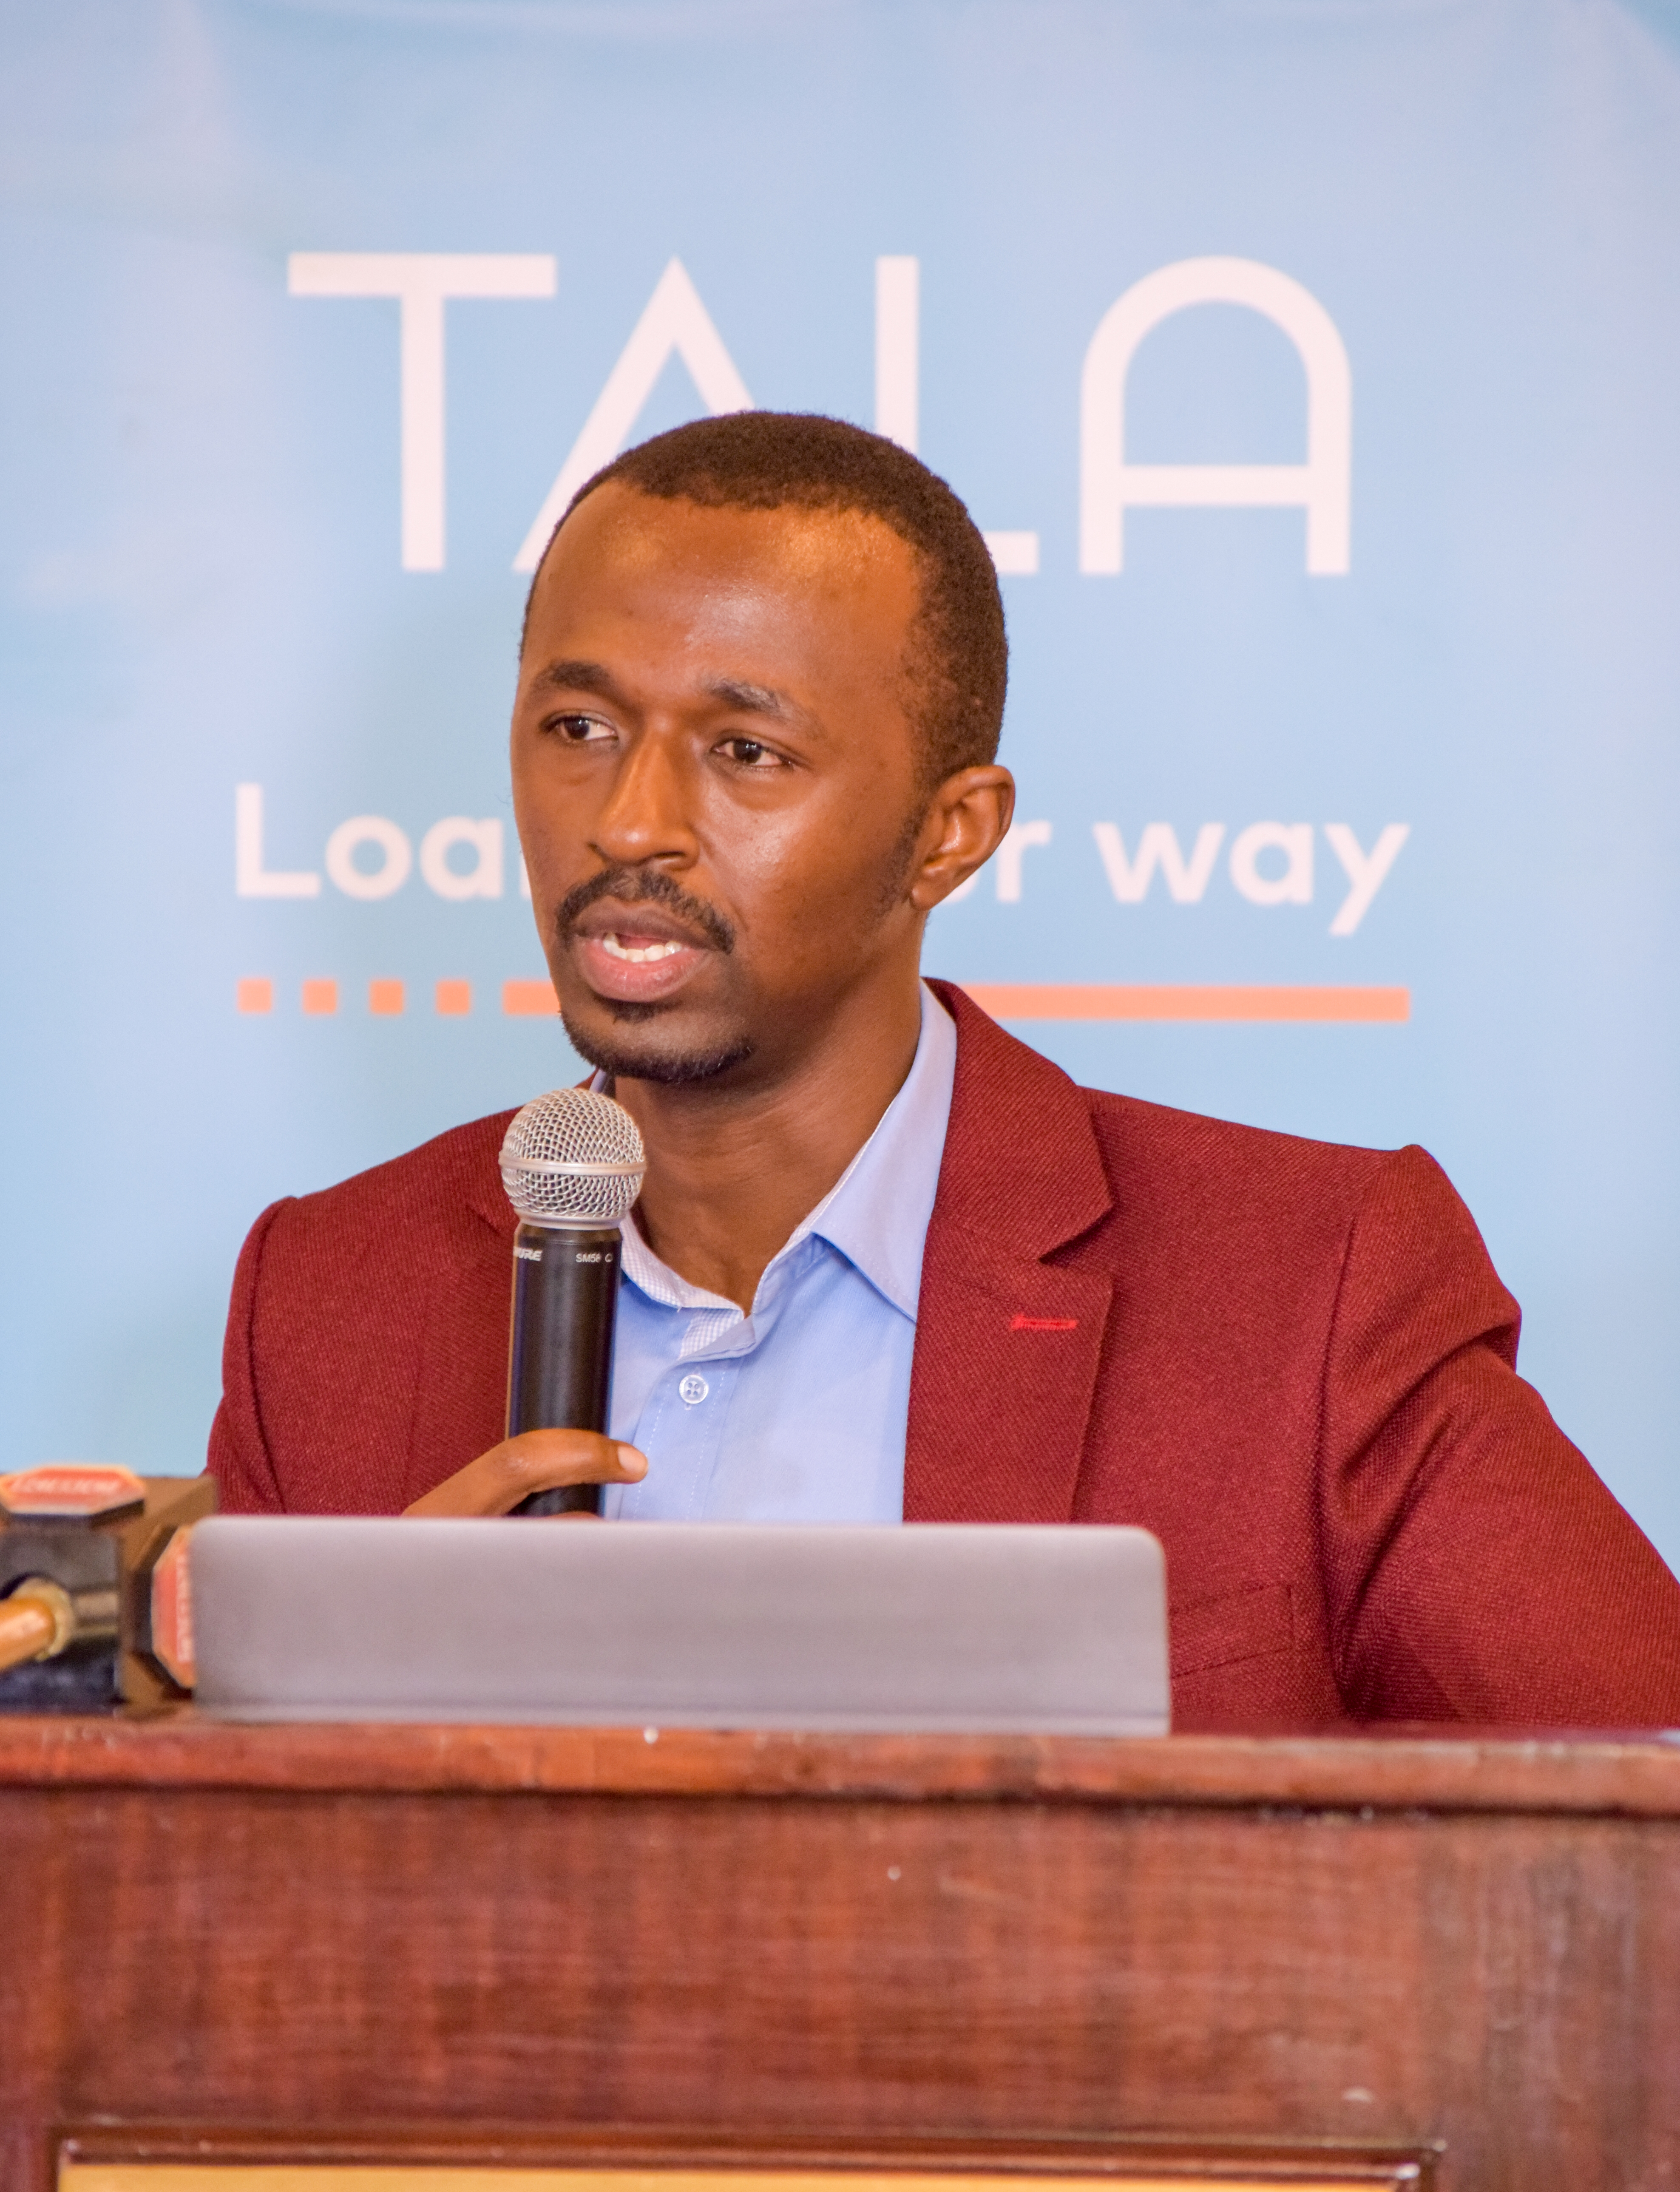 68% of Kenyans Borrowing Digital Loans From Tala Have Full Time Jobs, Report